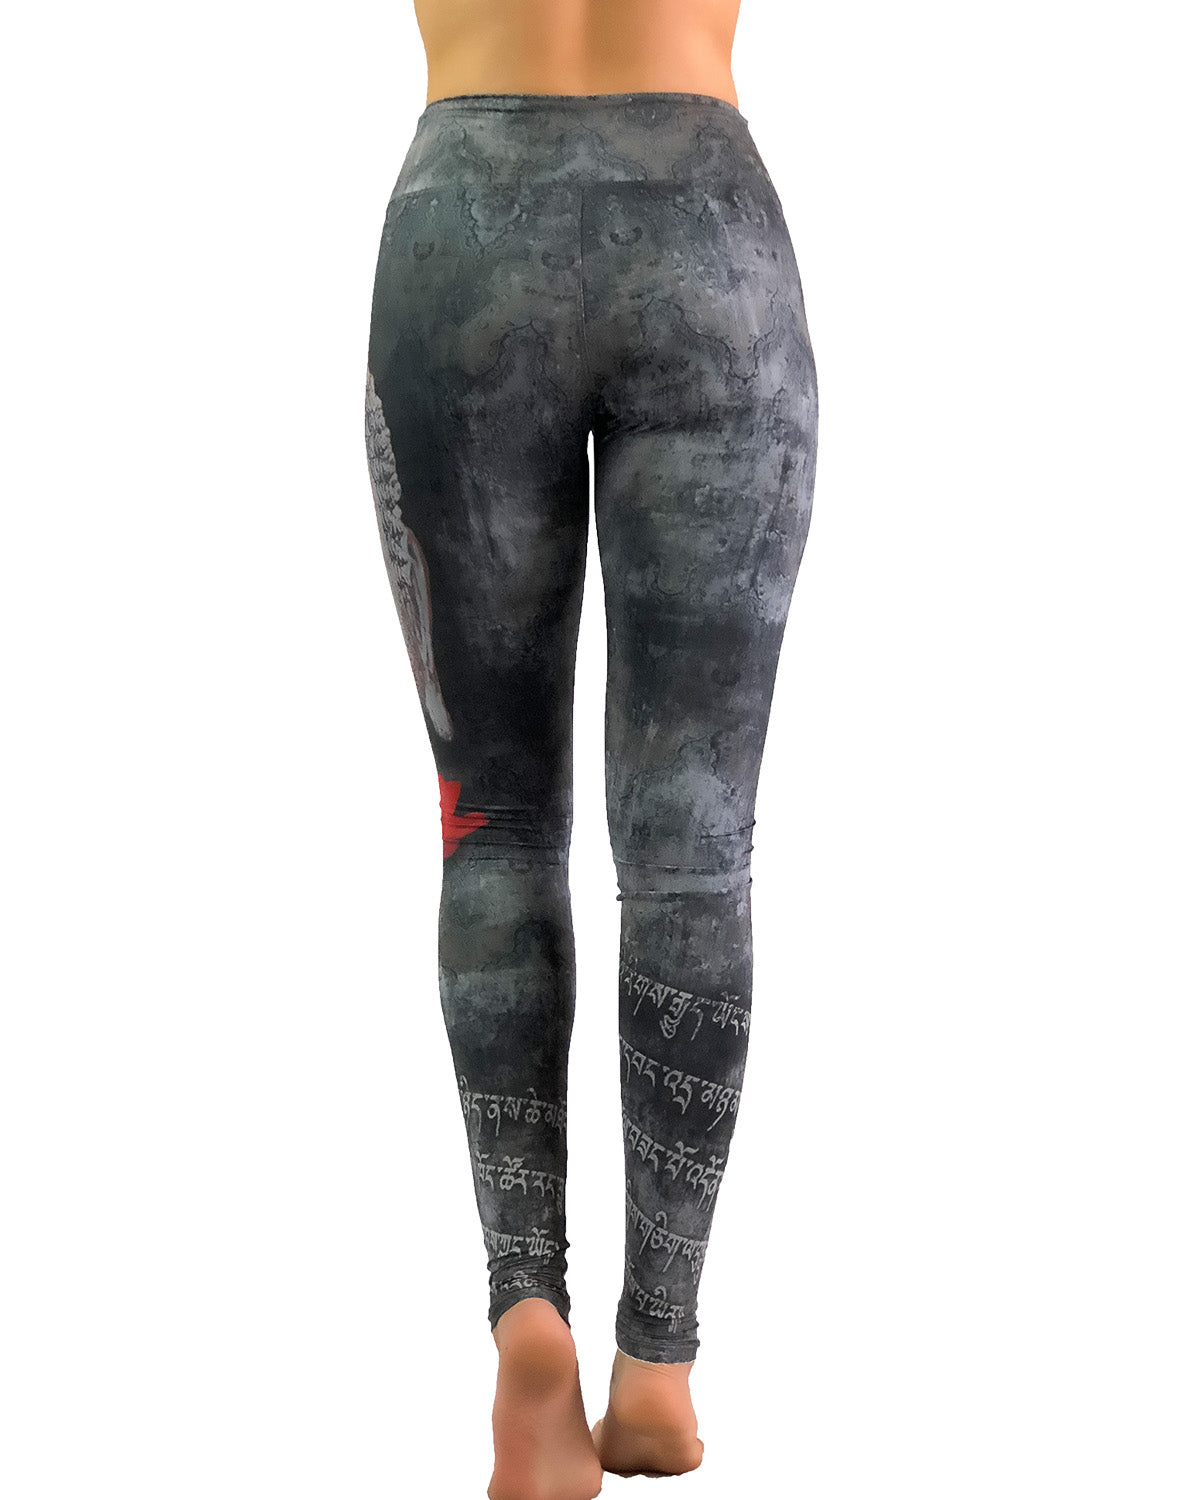 Leggings As comfortable as your favorite brand, crafted sustainably and  ethically with eco-friendly materials. – Rose Buddha